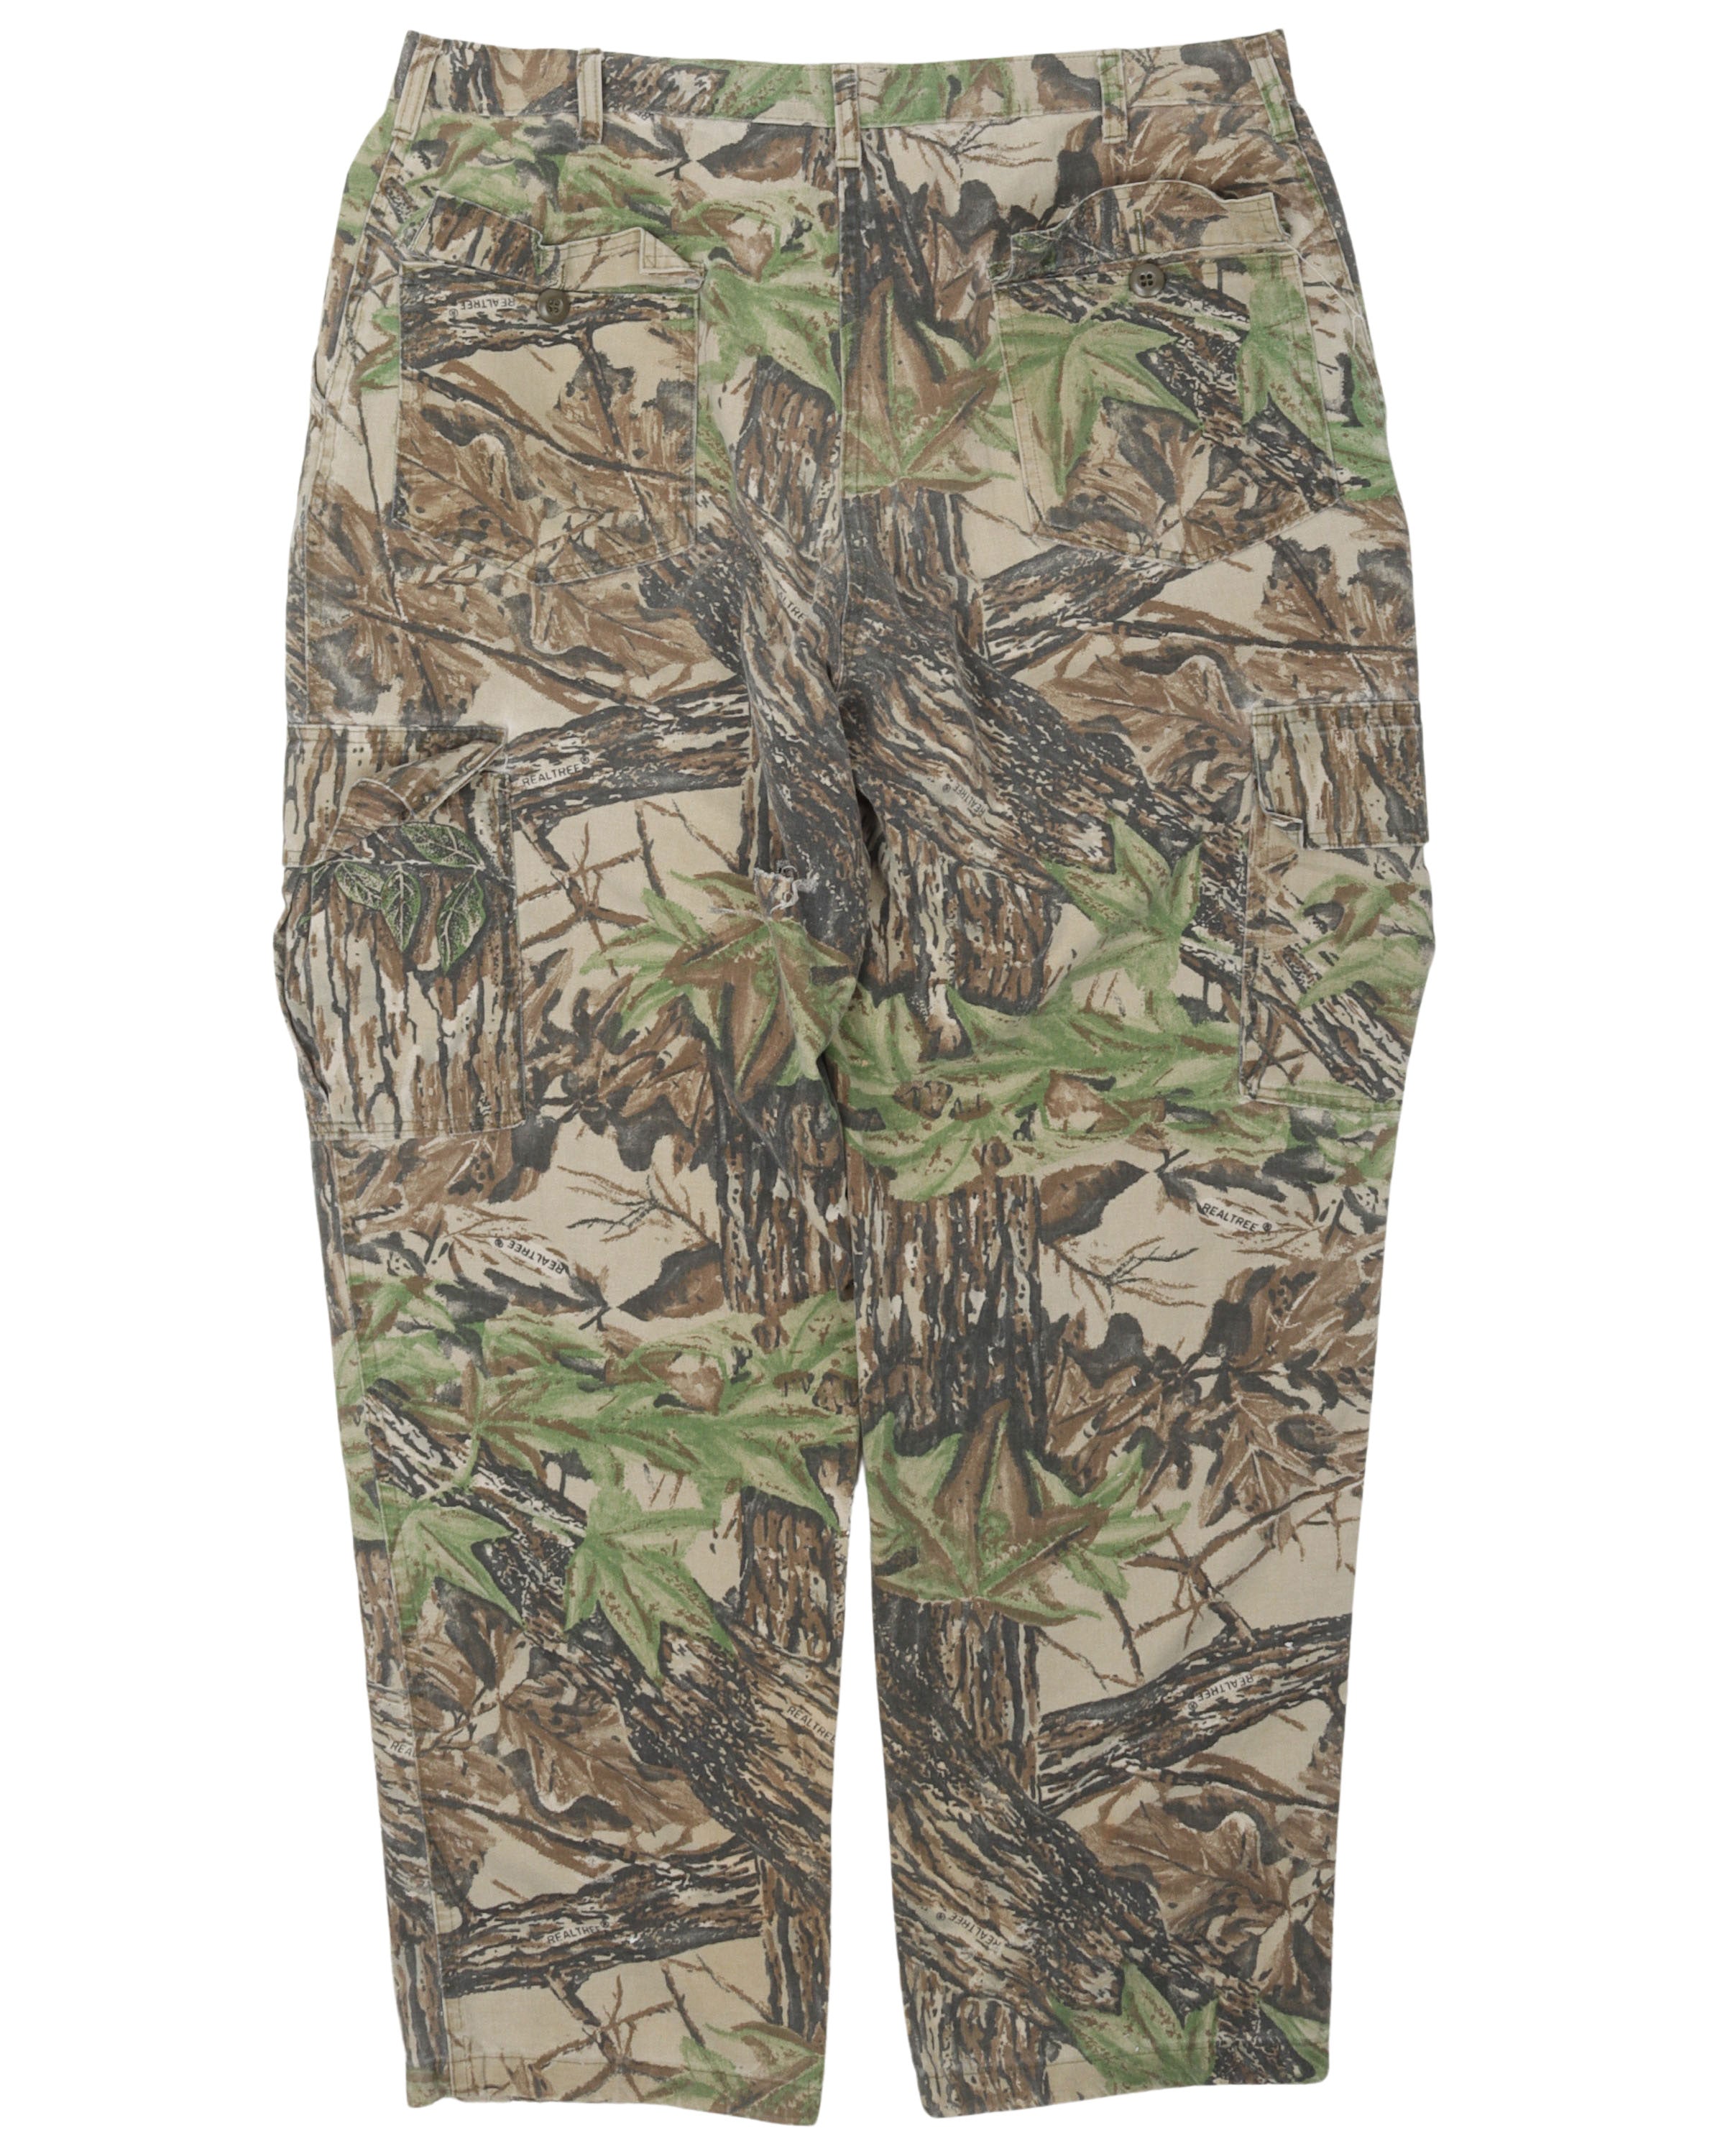 RealTree Camouflage Cargo Pants